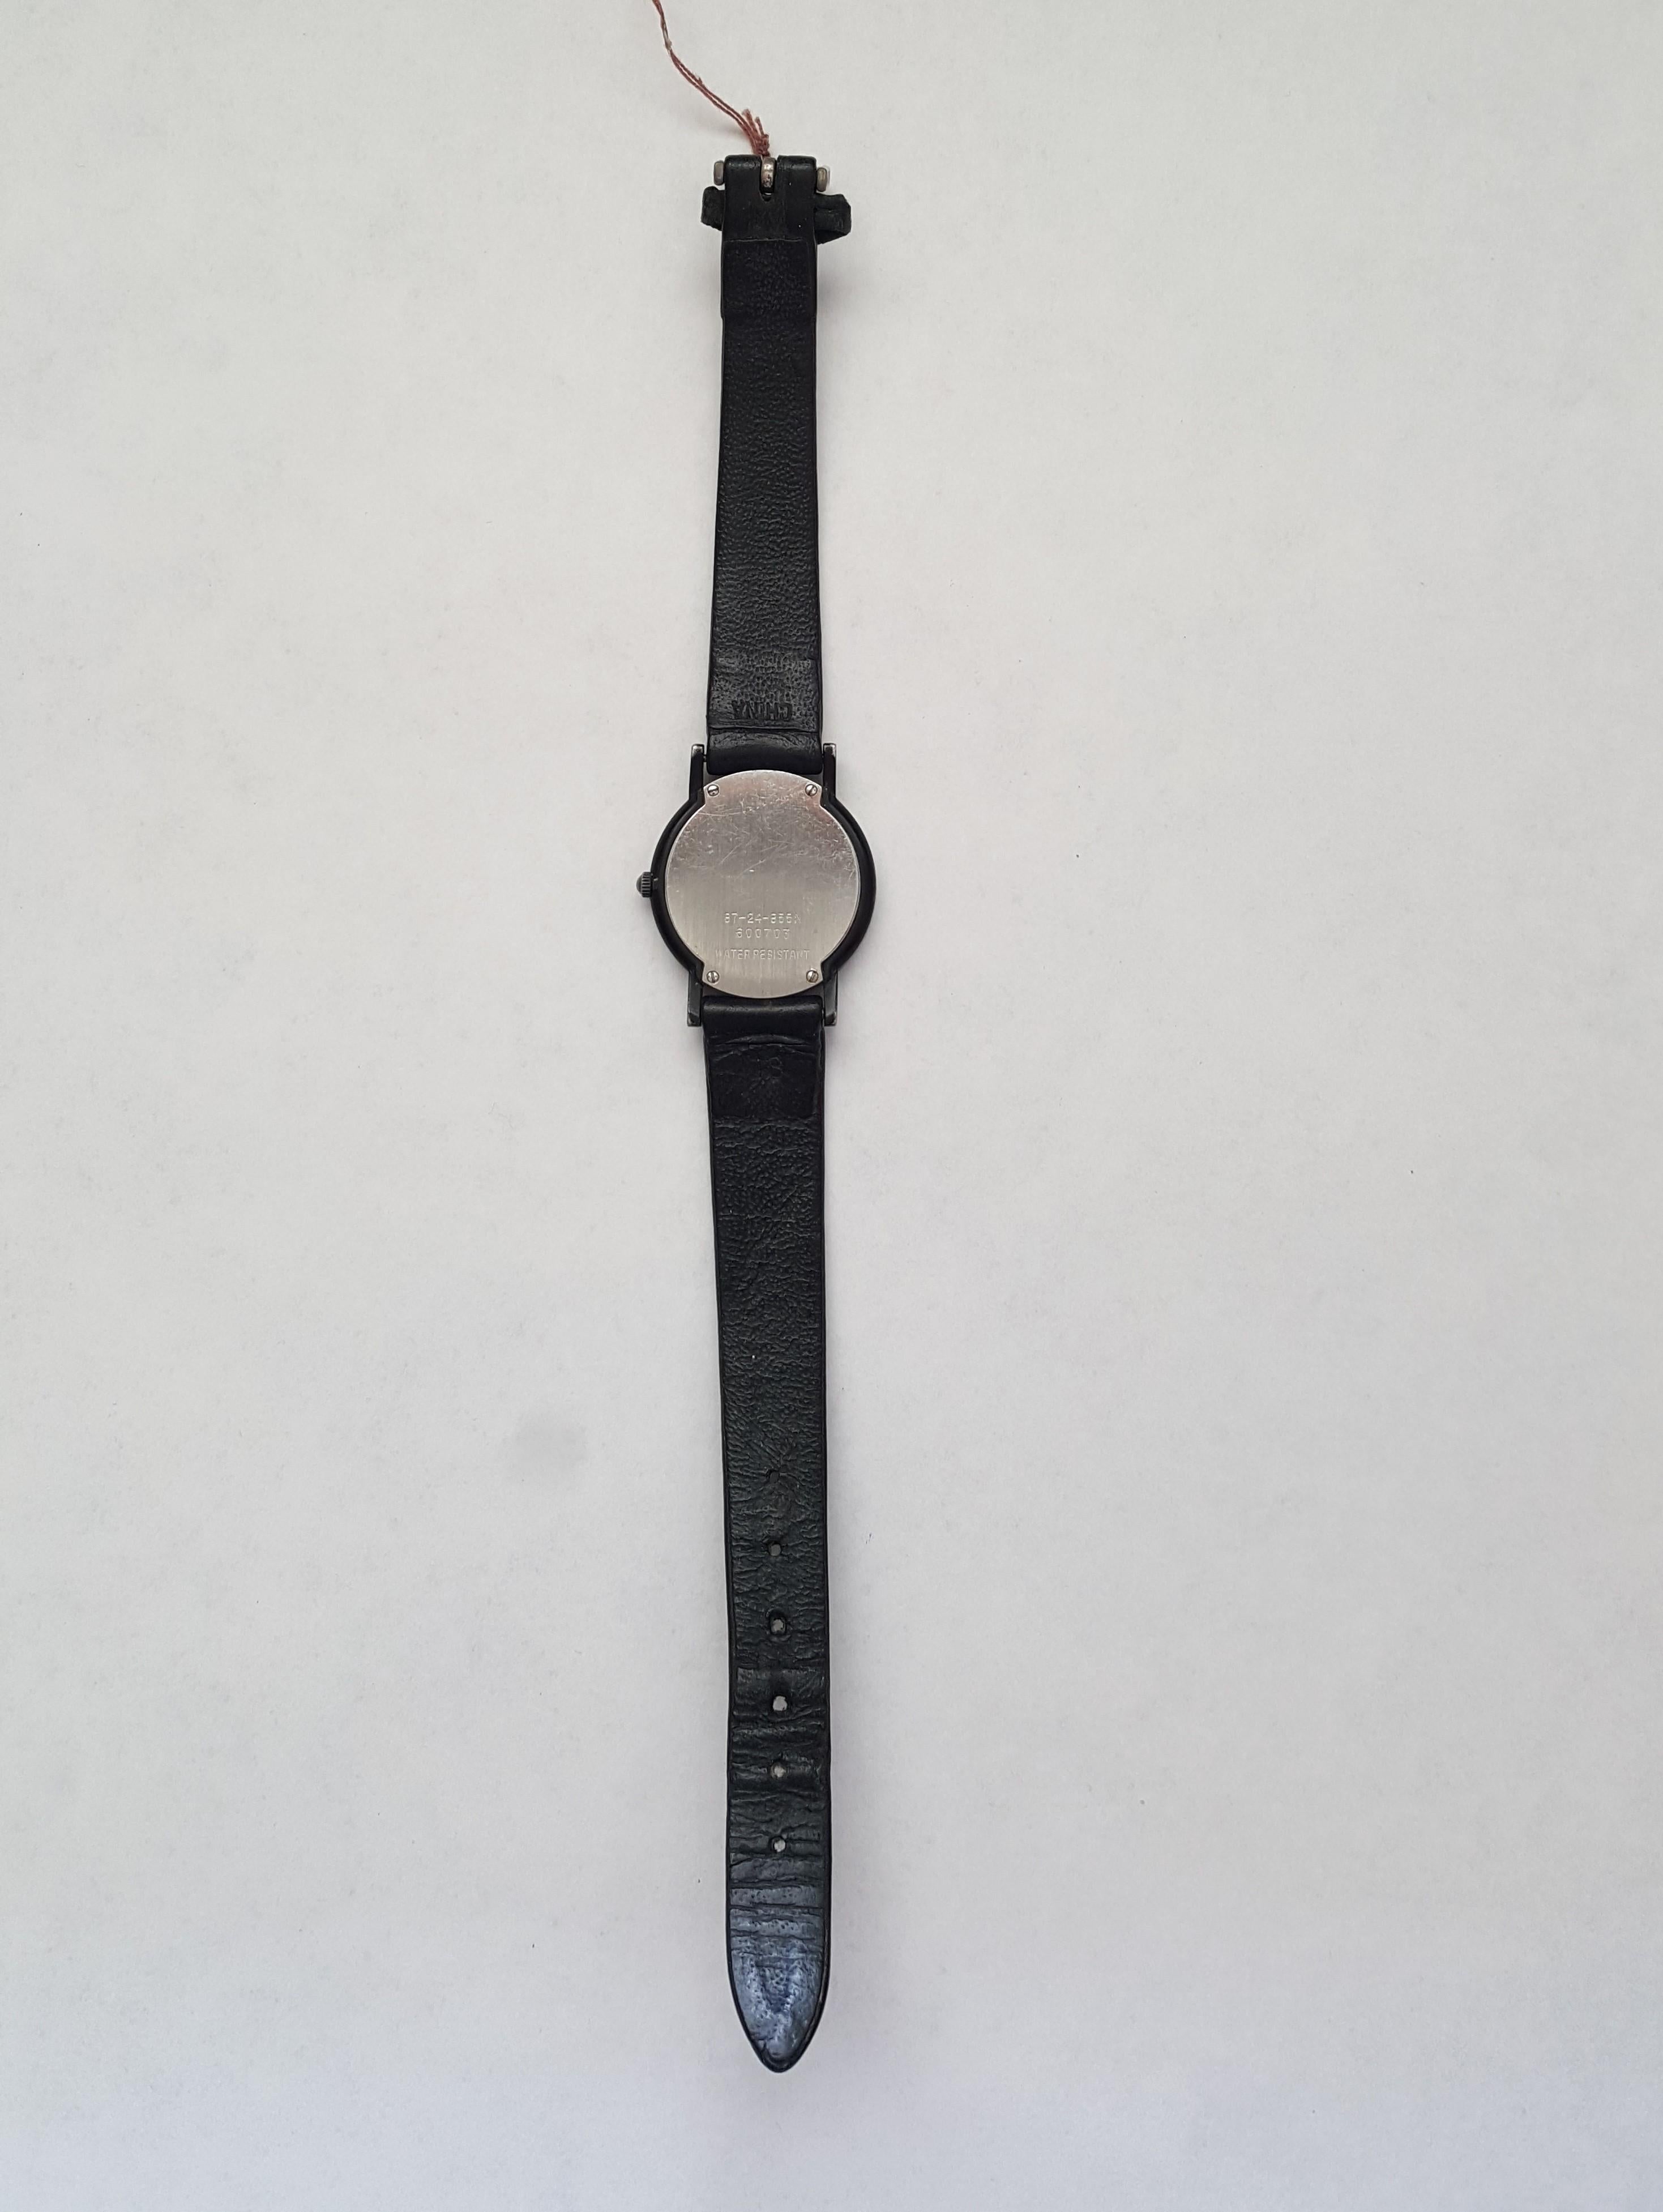 Movado Museum watch black dial with a quartz movement. The case is 24mm in diameter, 4 mm in thickness and the bracelet is 4 inches on the long side and 3 inches on the short side. Comes with original case, water resistant and model number